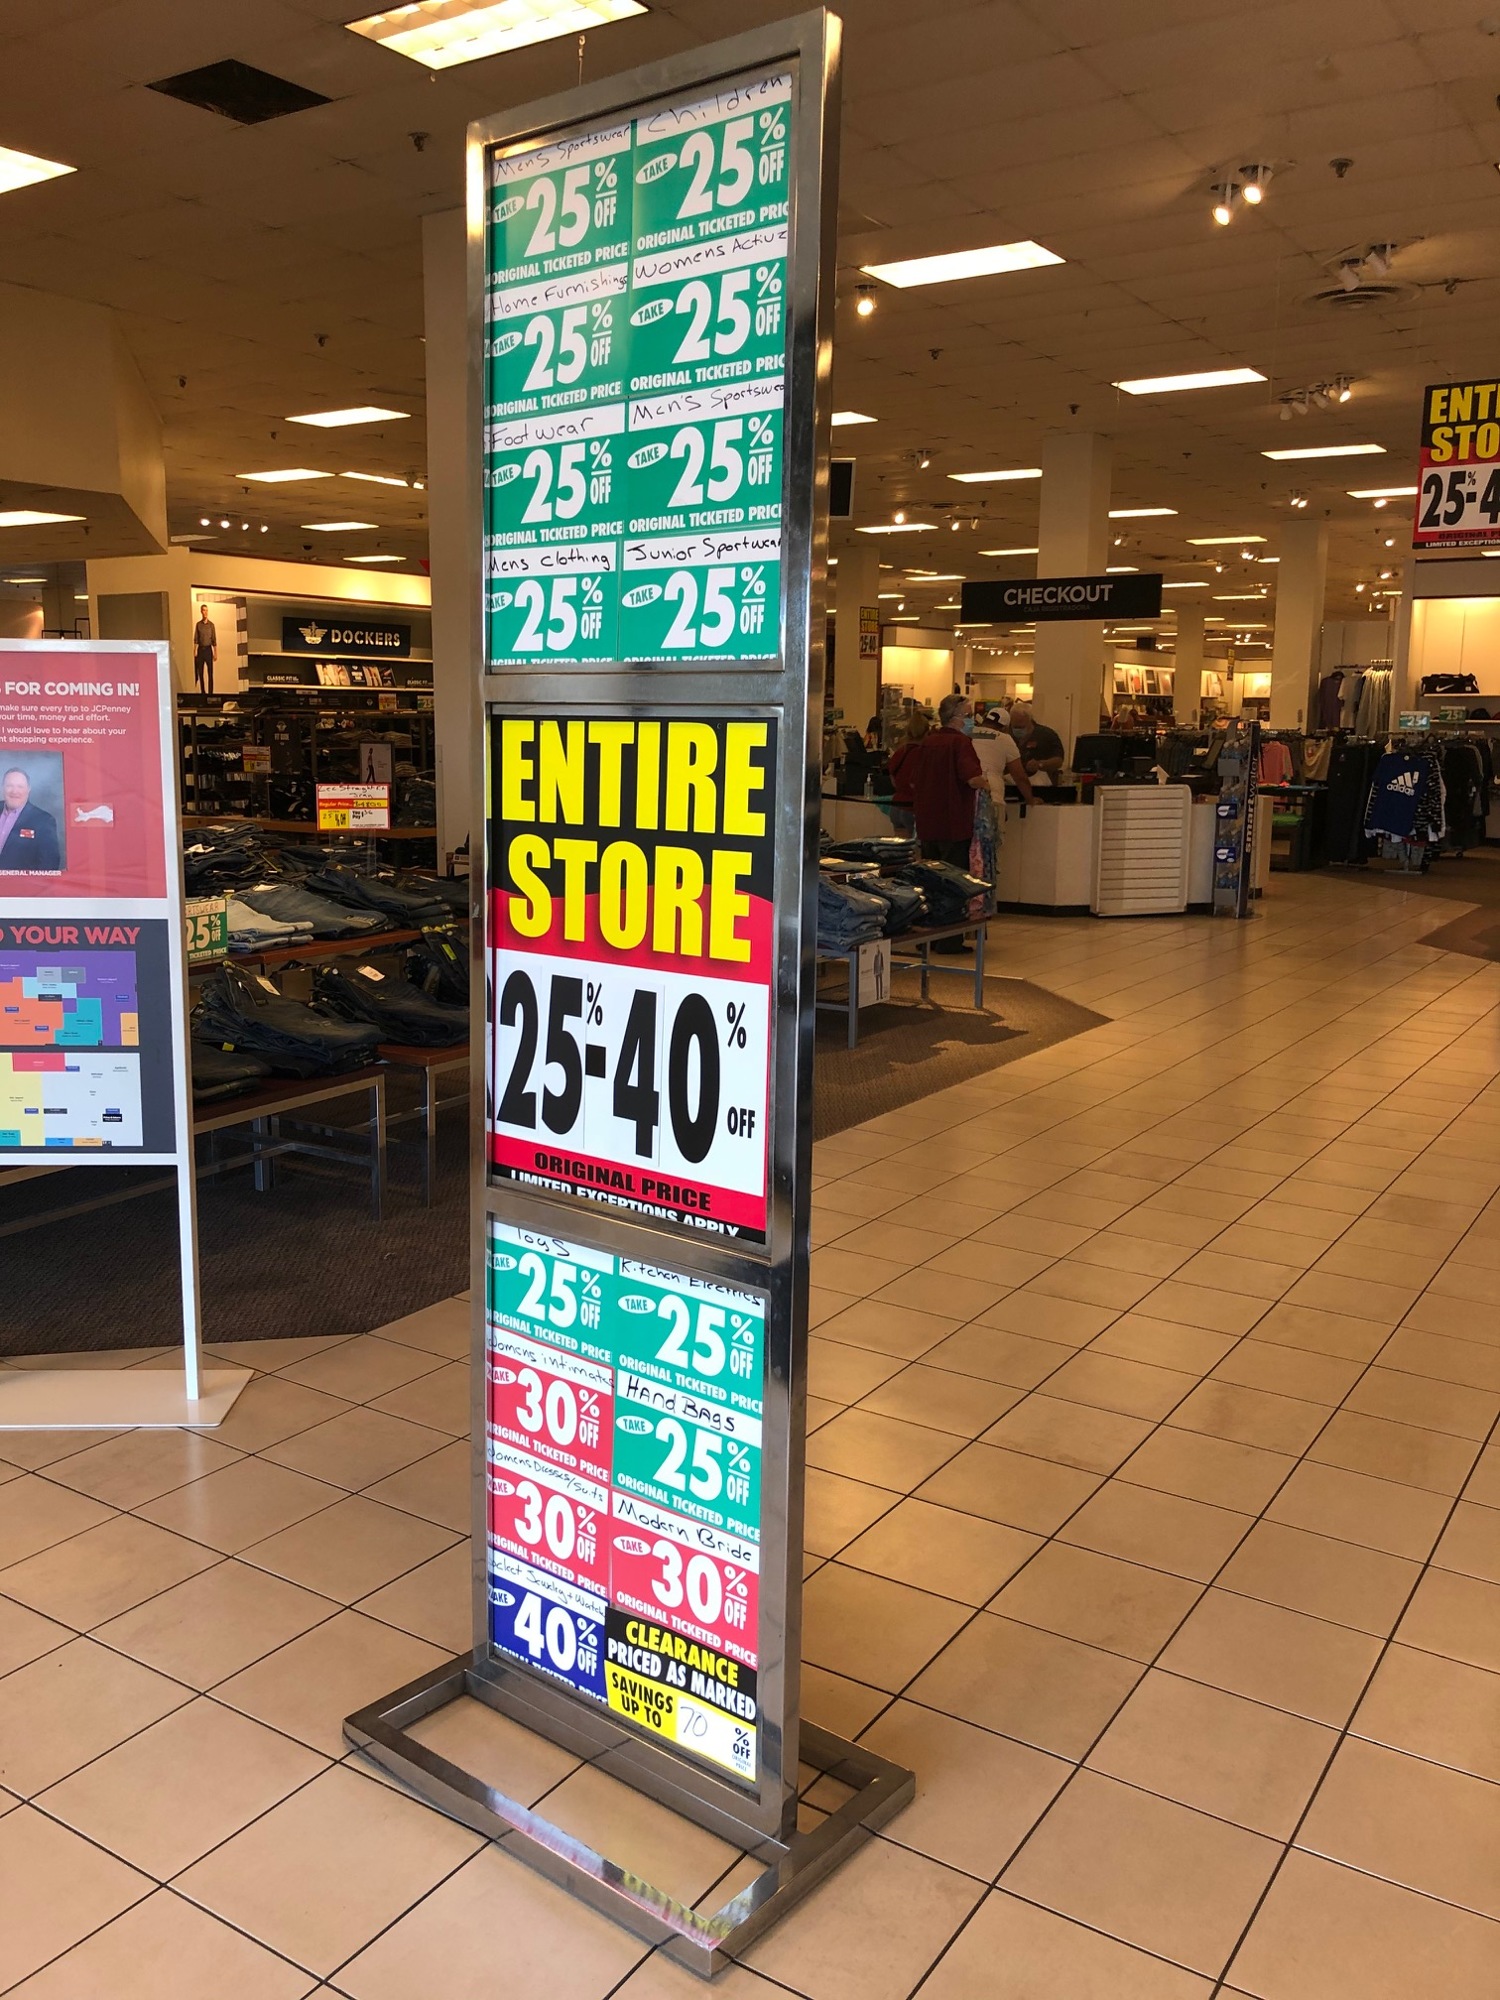 A clearance sign greets J.C. Penney customers at the mall entrance.